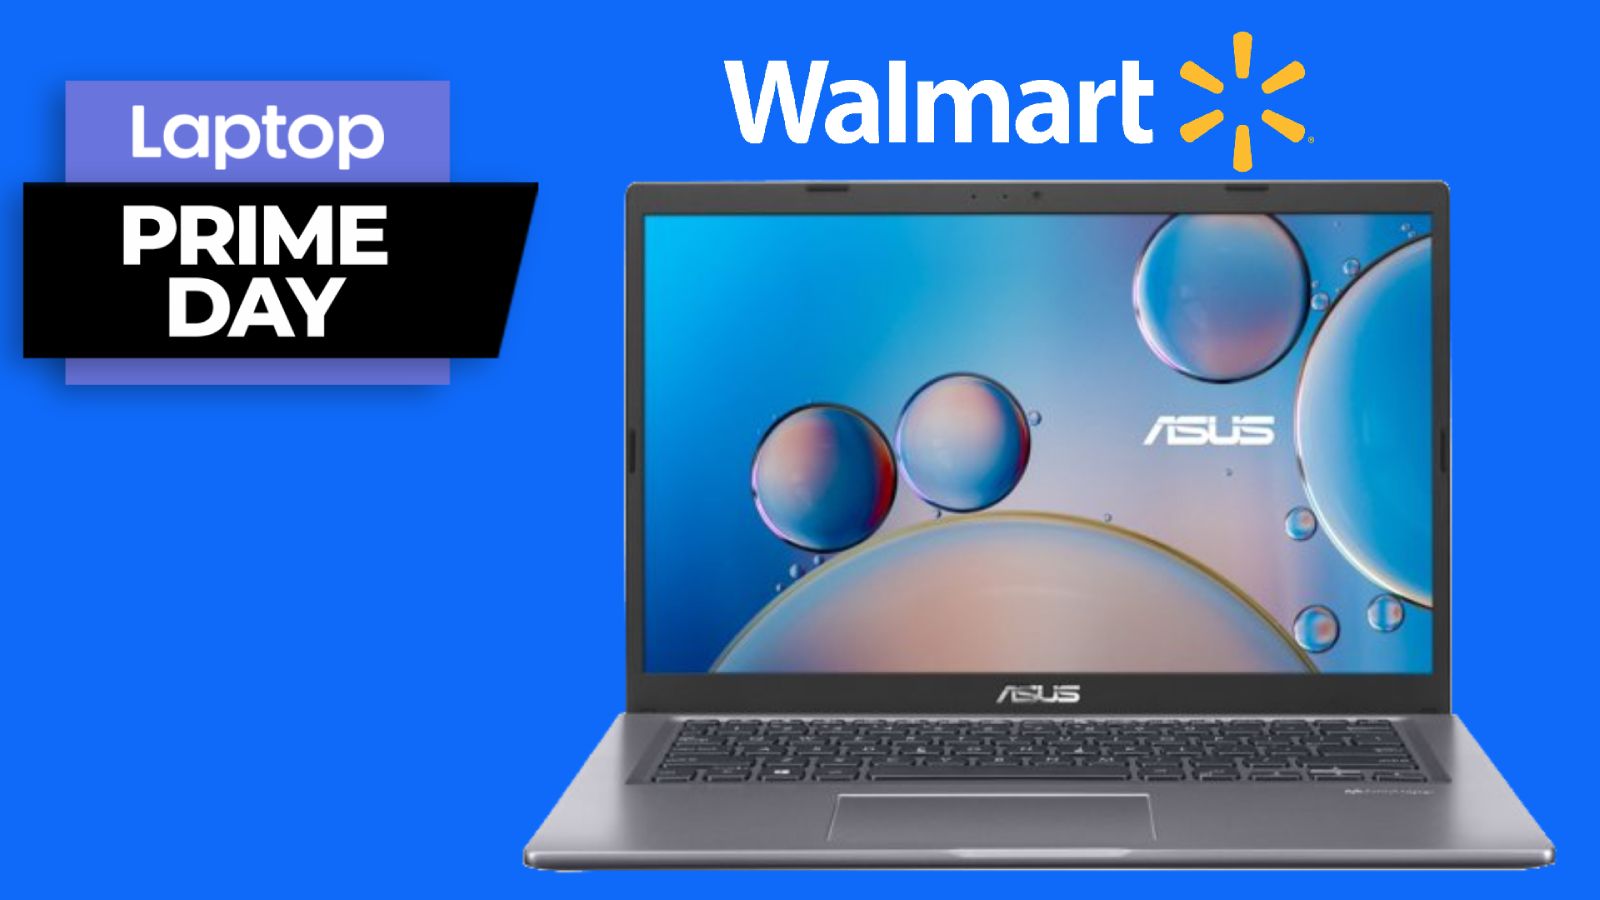 Walmart comes out swinging with this Prime Day deal on the Asus VivoBook 14